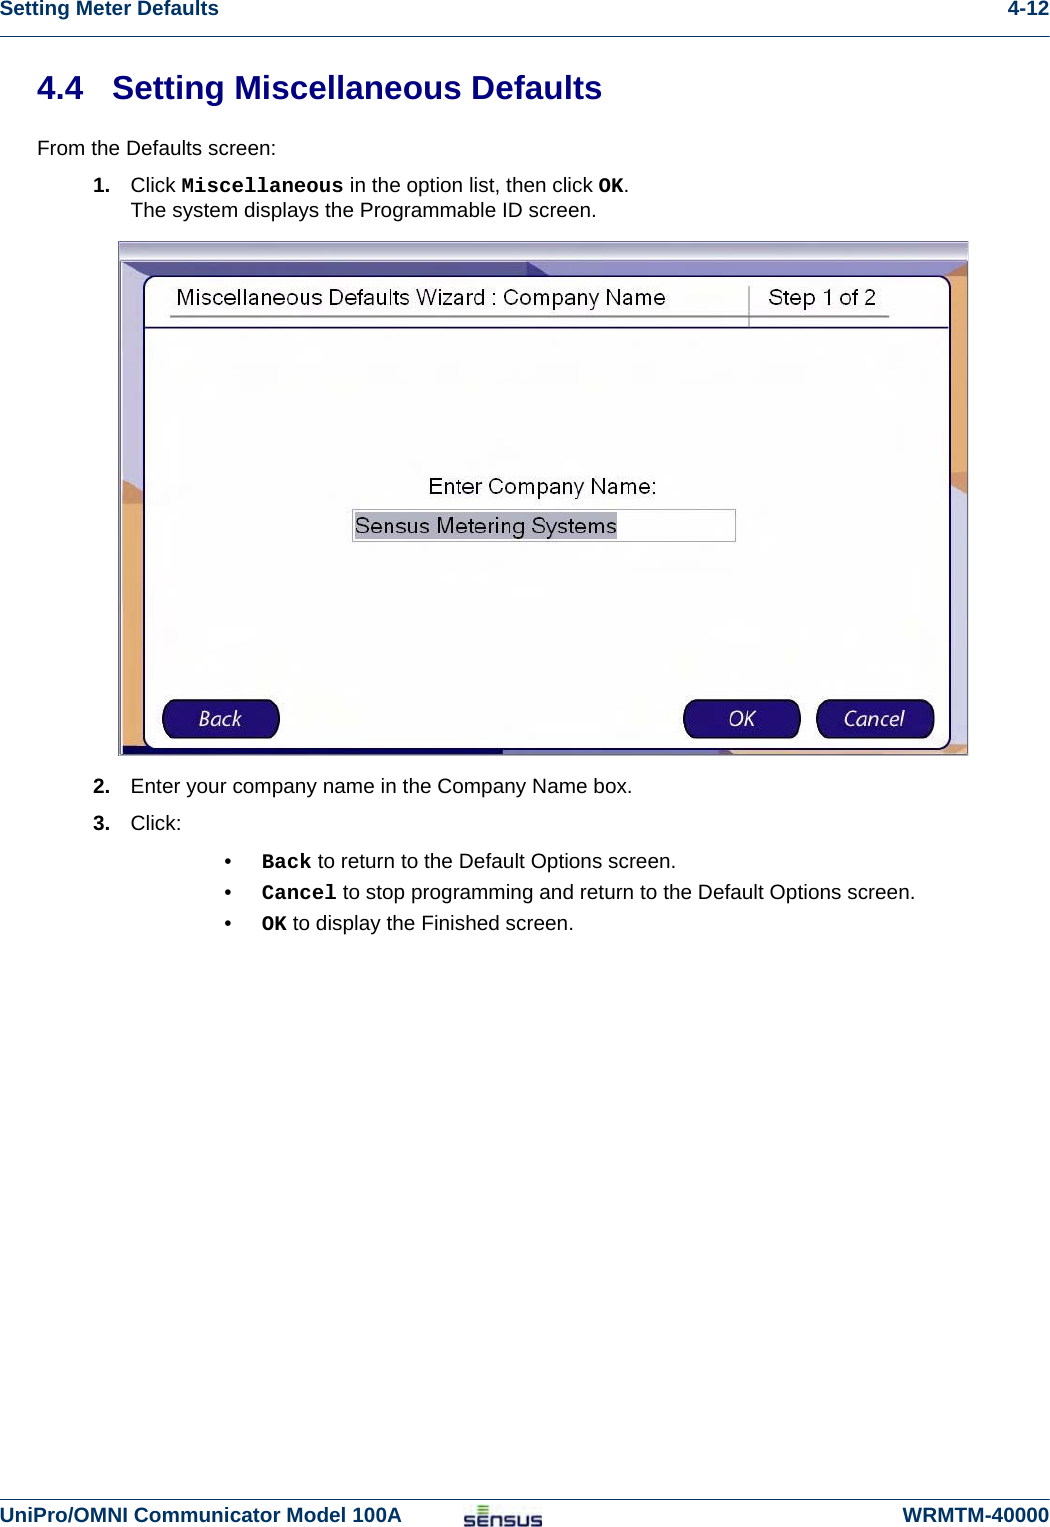 Setting Meter Defaults 4-12UniPro/OMNI Communicator Model 100A WRMTM-400004.4 Setting Miscellaneous DefaultsFrom the Defaults screen:1. Click Miscellaneous in the option list, then click OK.The system displays the Programmable ID screen.2. Enter your company name in the Company Name box. 3. Click:•Back to return to the Default Options screen.•Cancel to stop programming and return to the Default Options screen.•OK to display the Finished screen.